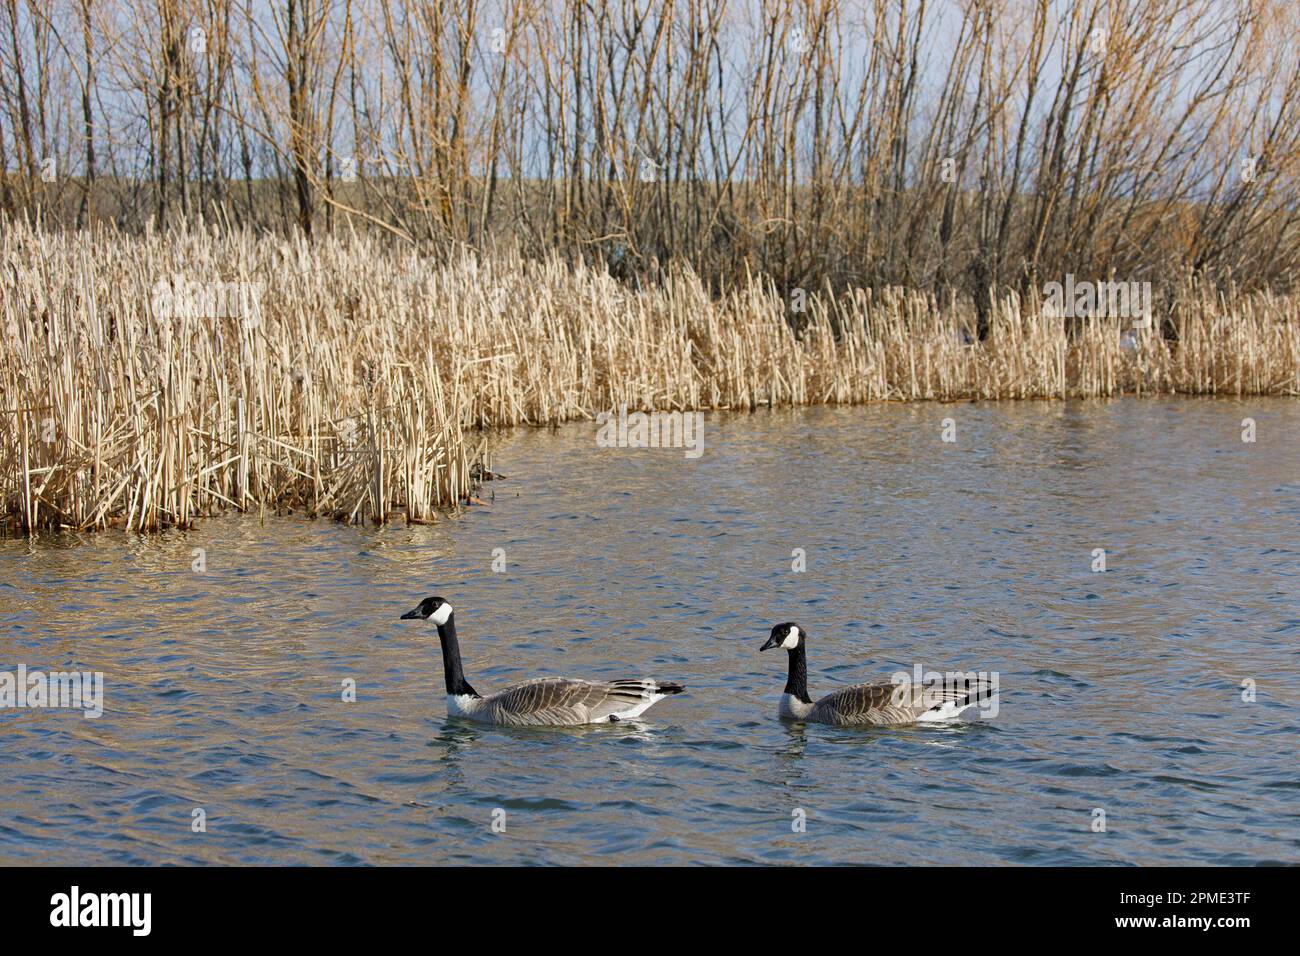 Two Canada geese swimming in city stormwater treatment pond, Calgary, Alberta. Branta canadensis. Stock Photo